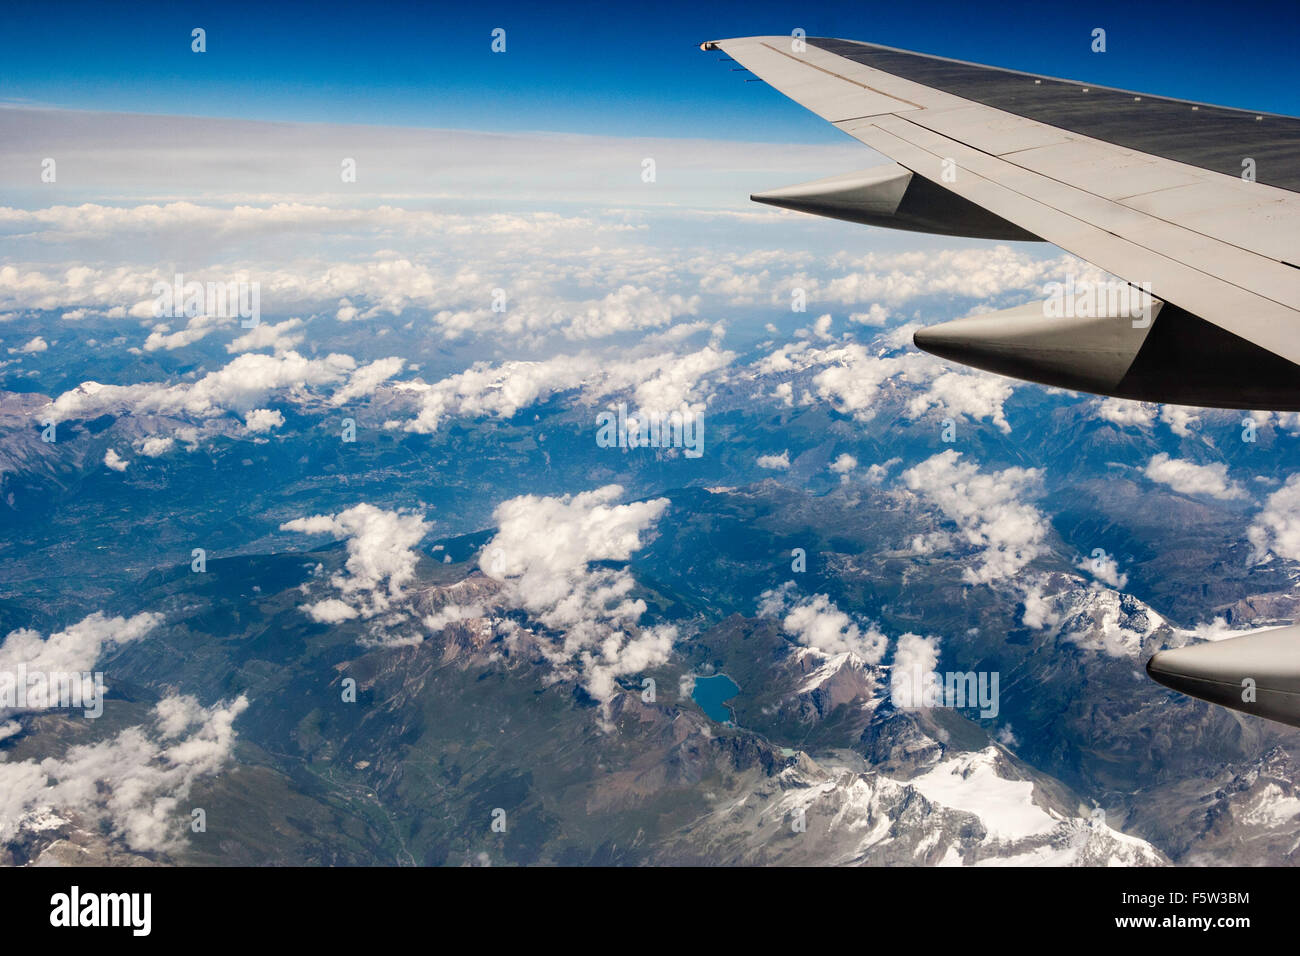 Switzerland. The Alps, seen from plane at 30,000 feet. Snow-topped  mountains lakes. Edge of plane wing with flap track fairings Stock Photo -  Alamy